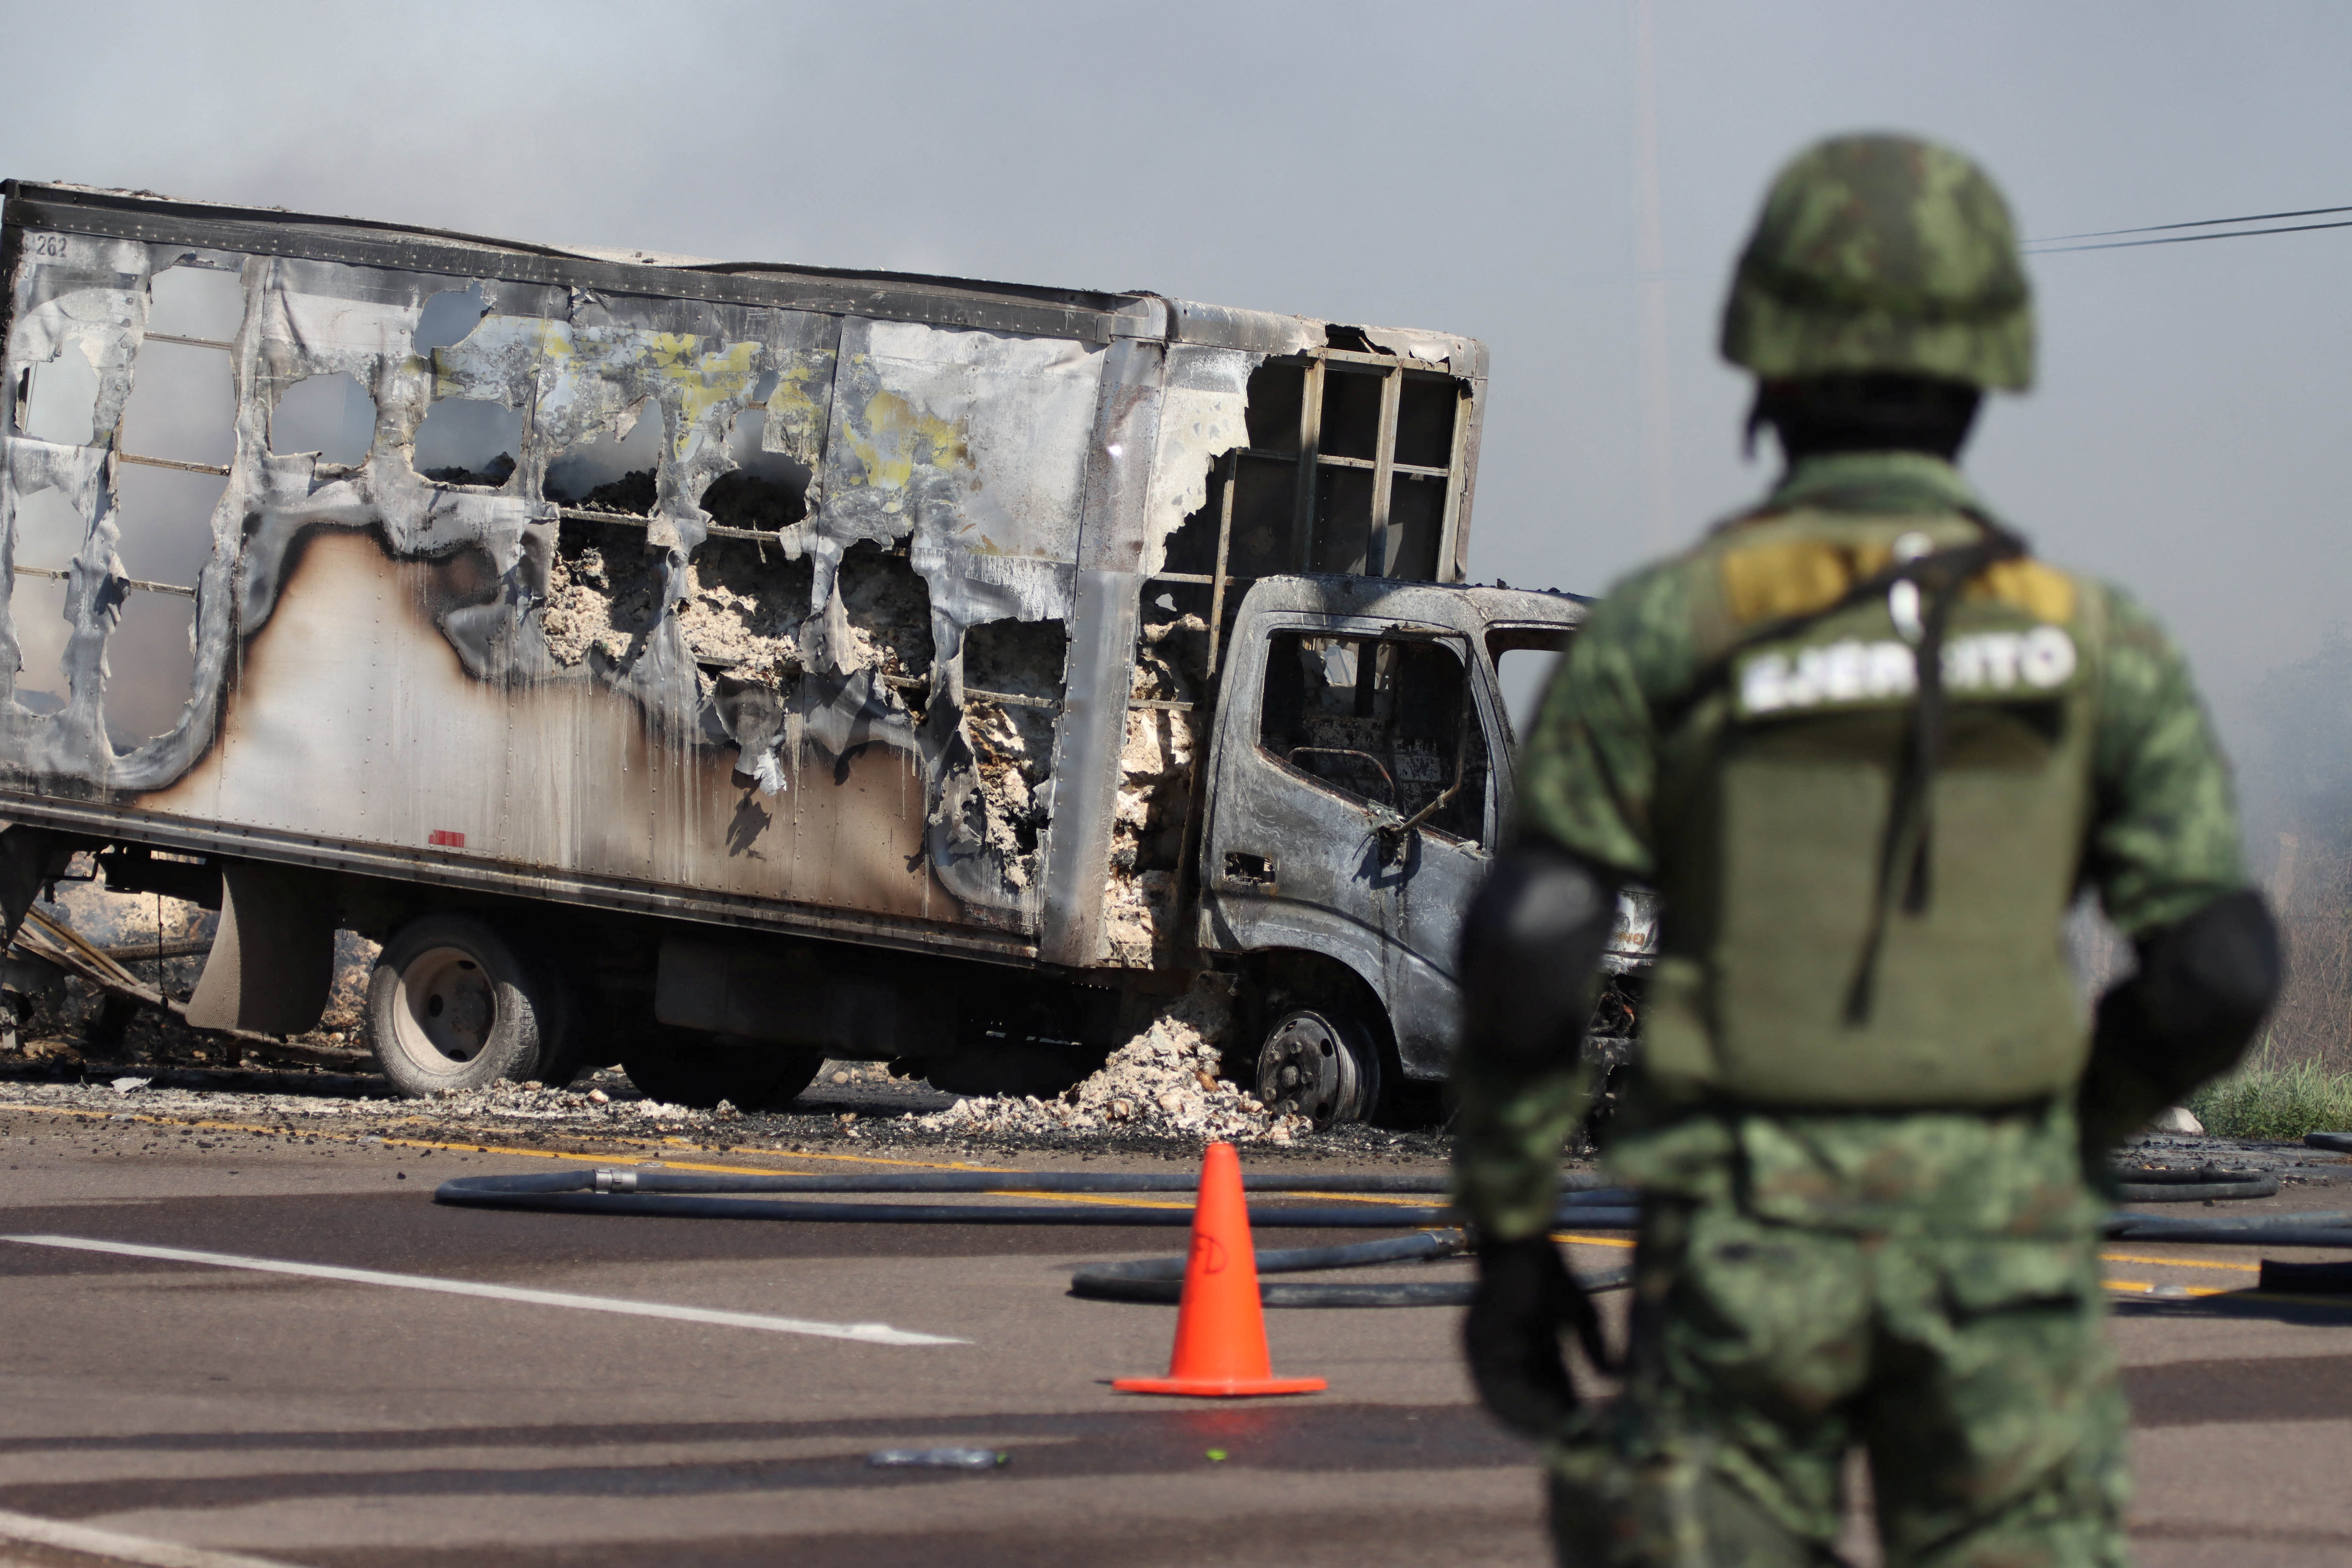 A soldier keeps watch near the remains of a burnt-out vehicle that members of the Sinaloa Cartel set on fire as a barricade (Photo: Reuters)